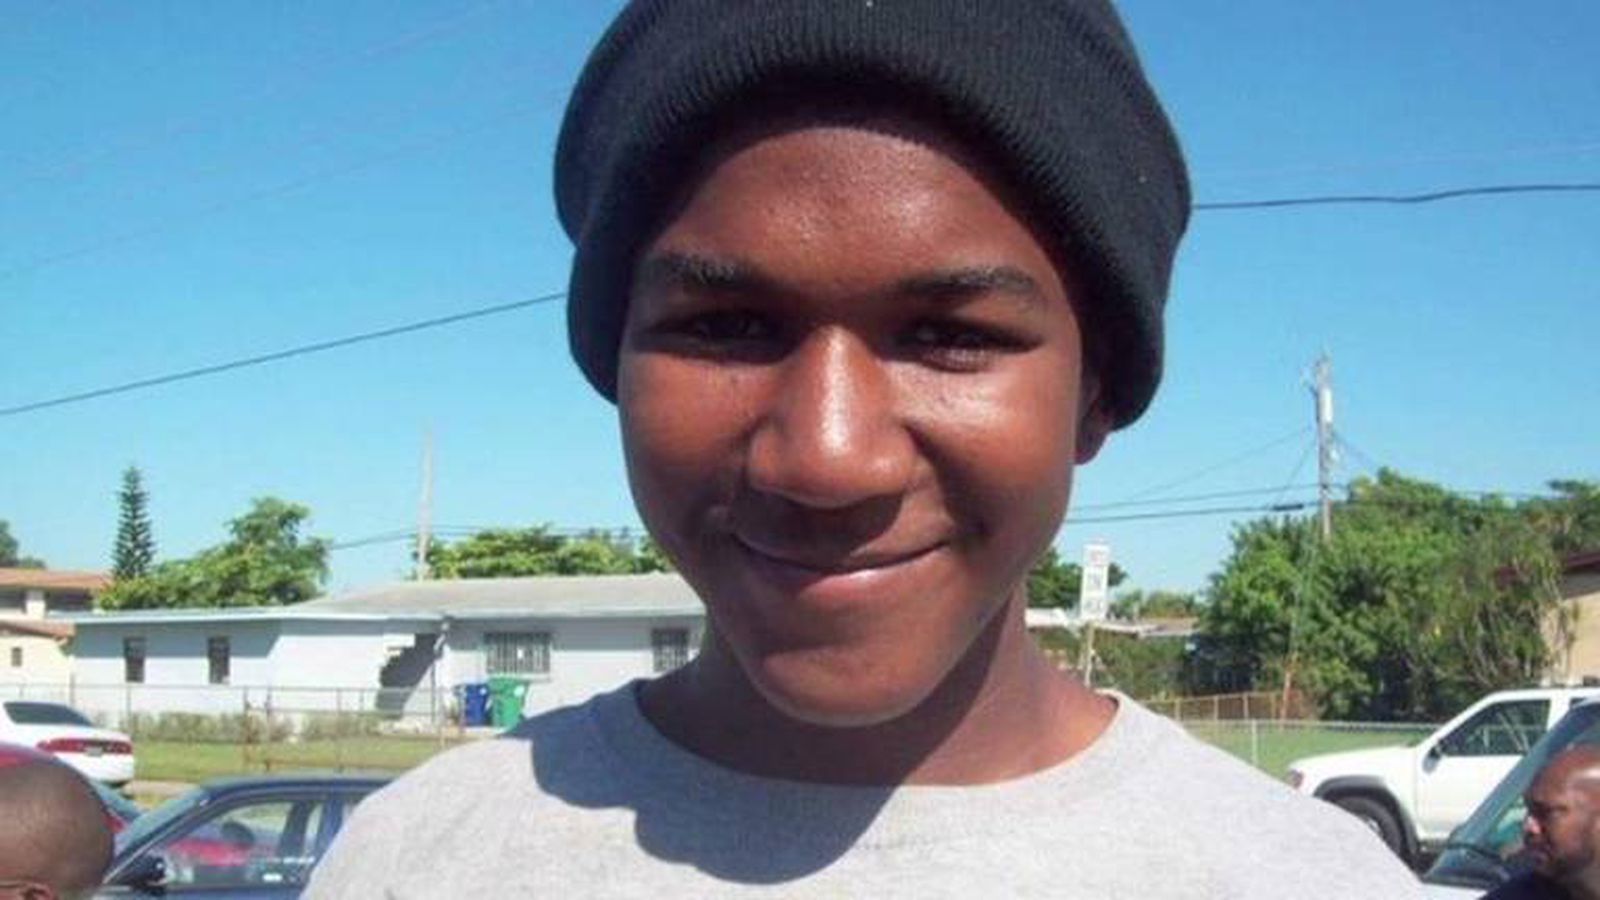 Trayvon Martin: young, Black man with gray t-shirt and black hat in front of a blue sky.